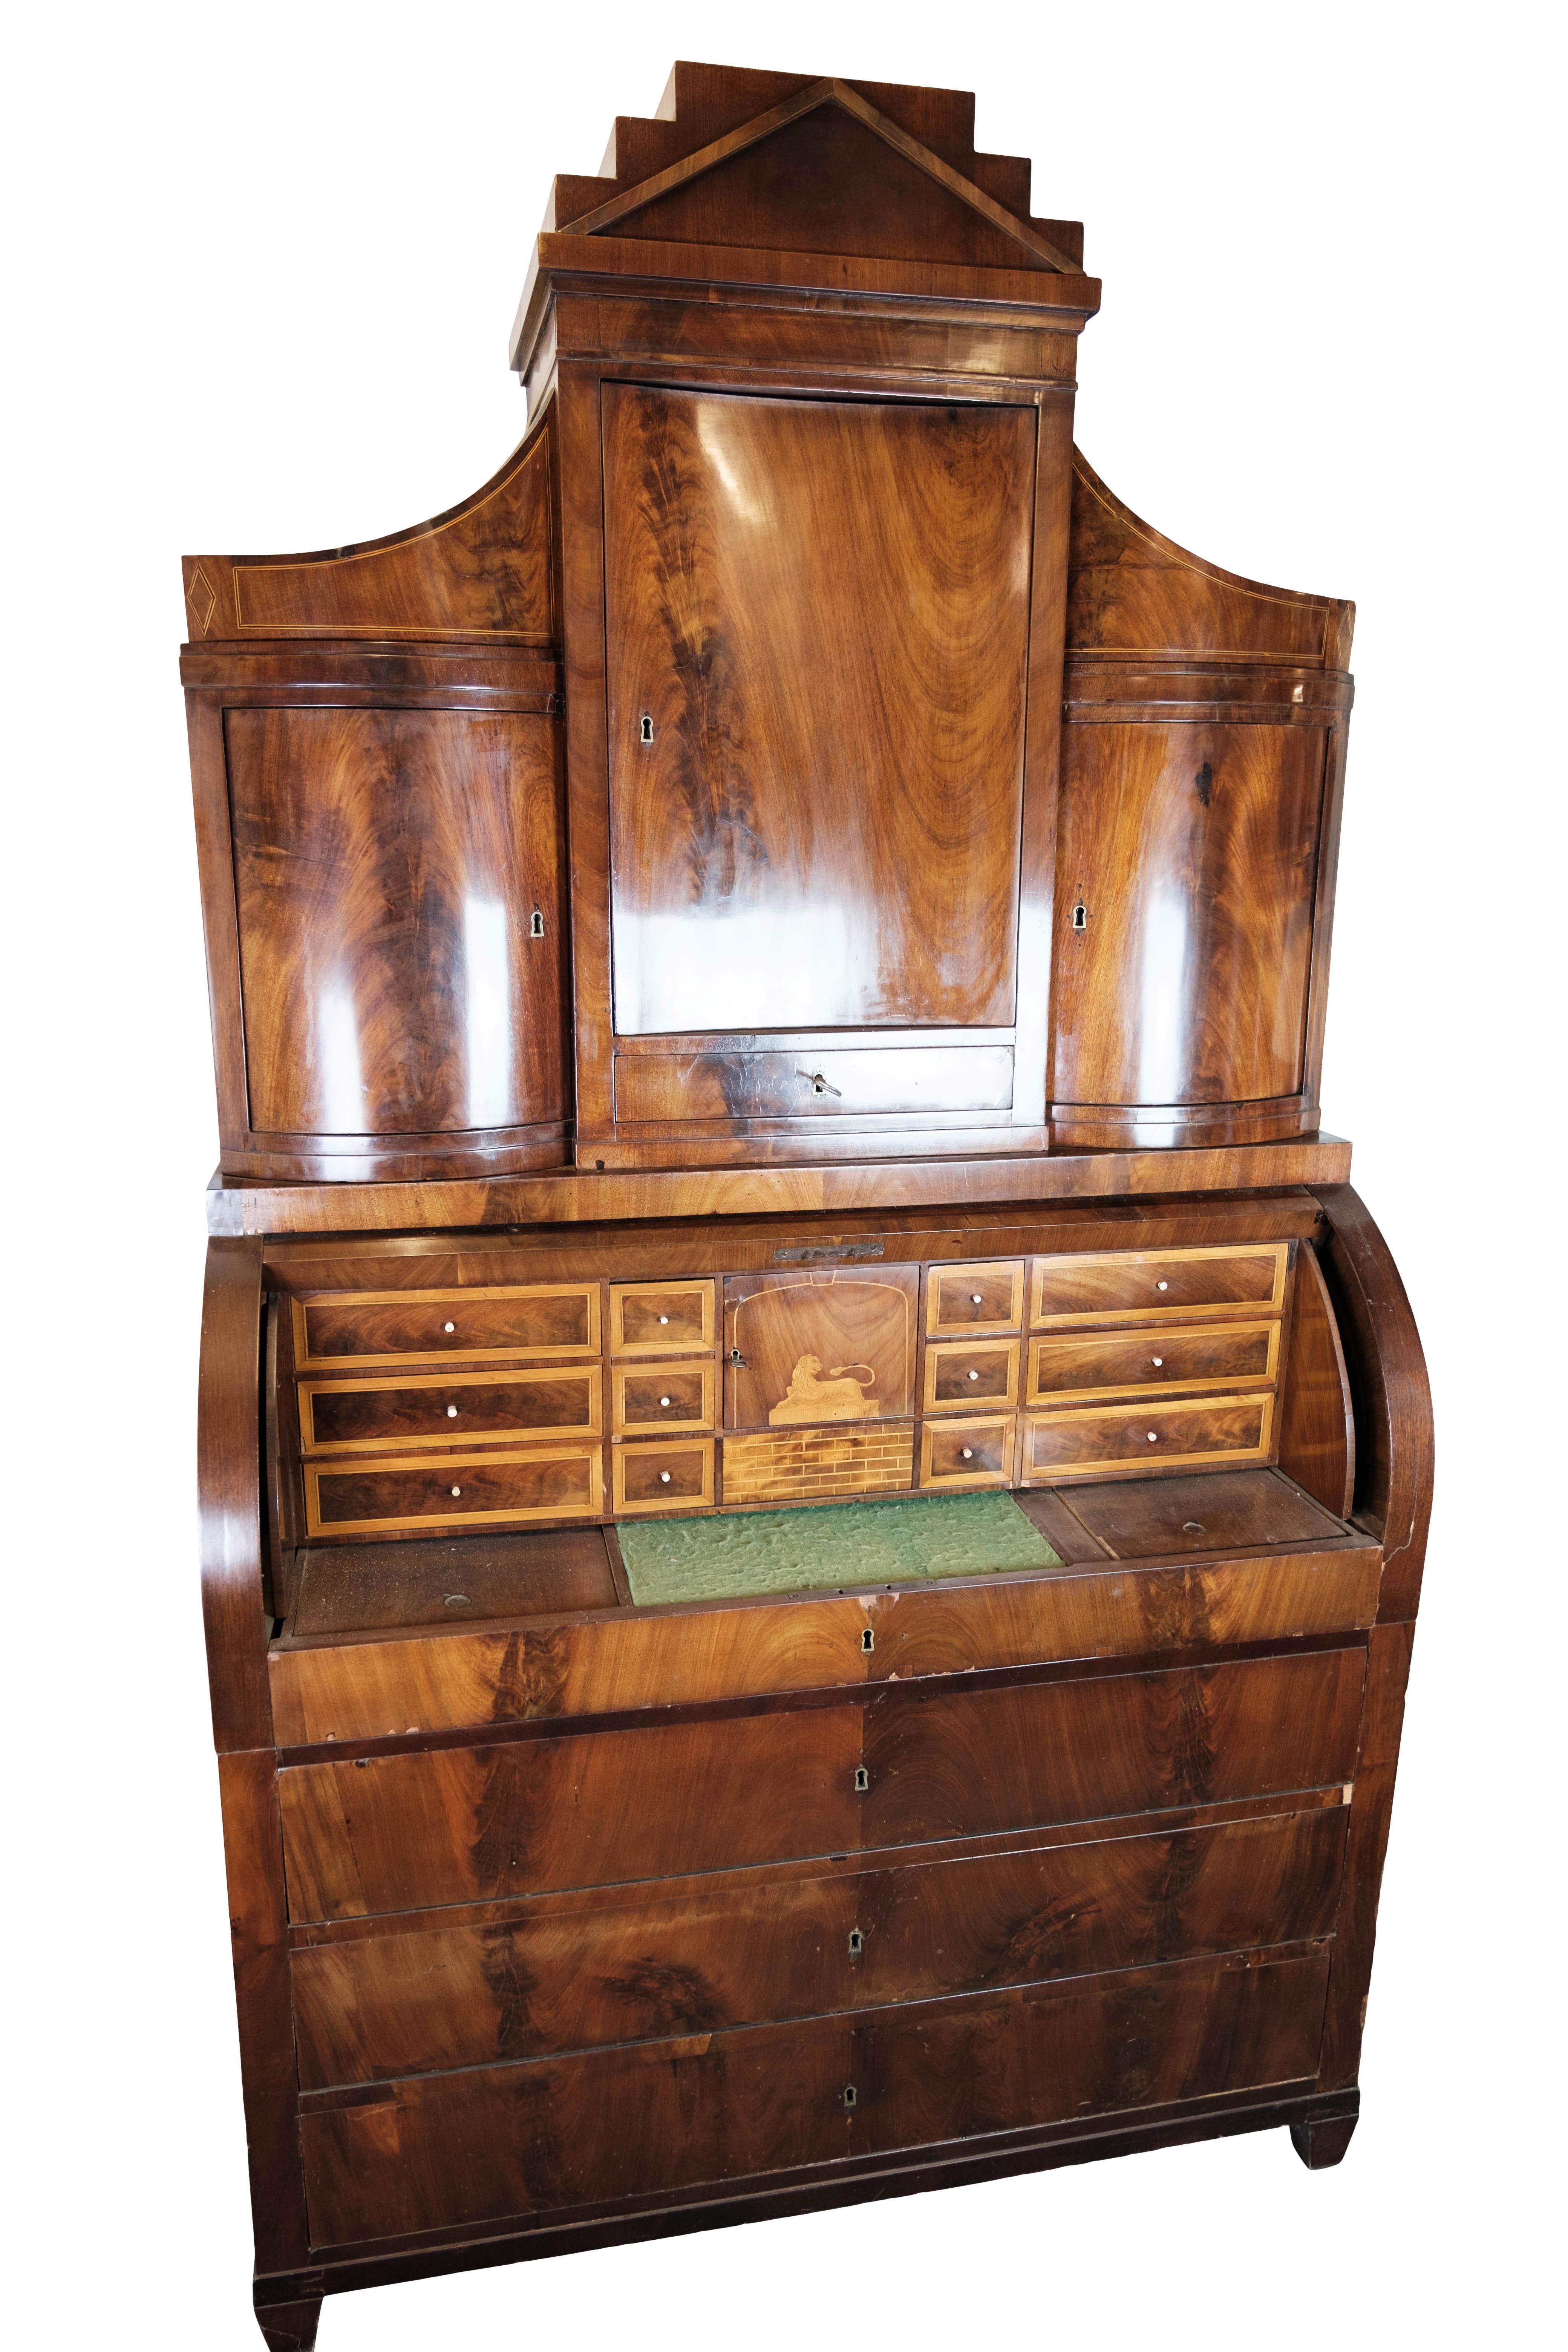 The large Late Empire hand-polished mahogany chatol with marquetry from the 1820s is an impressive piece of furniture that exudes an aura of elegance and historical significance. The chatol, with its hand-polished mahogany and delicate marquetry